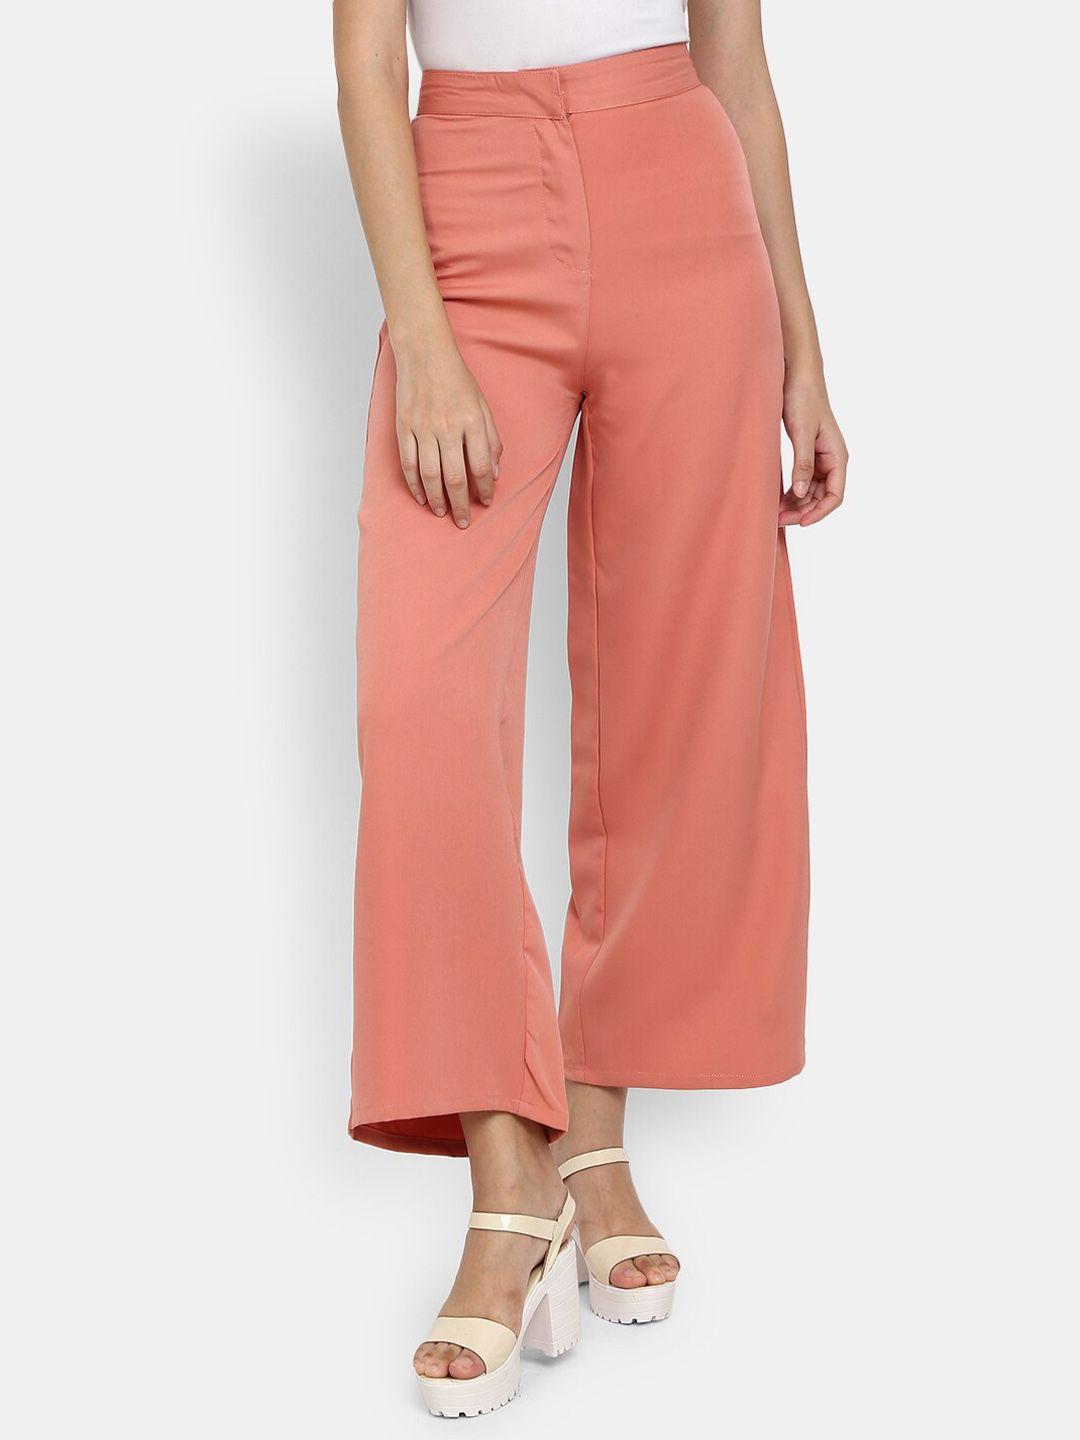 v-mart women pink solid classic trousers